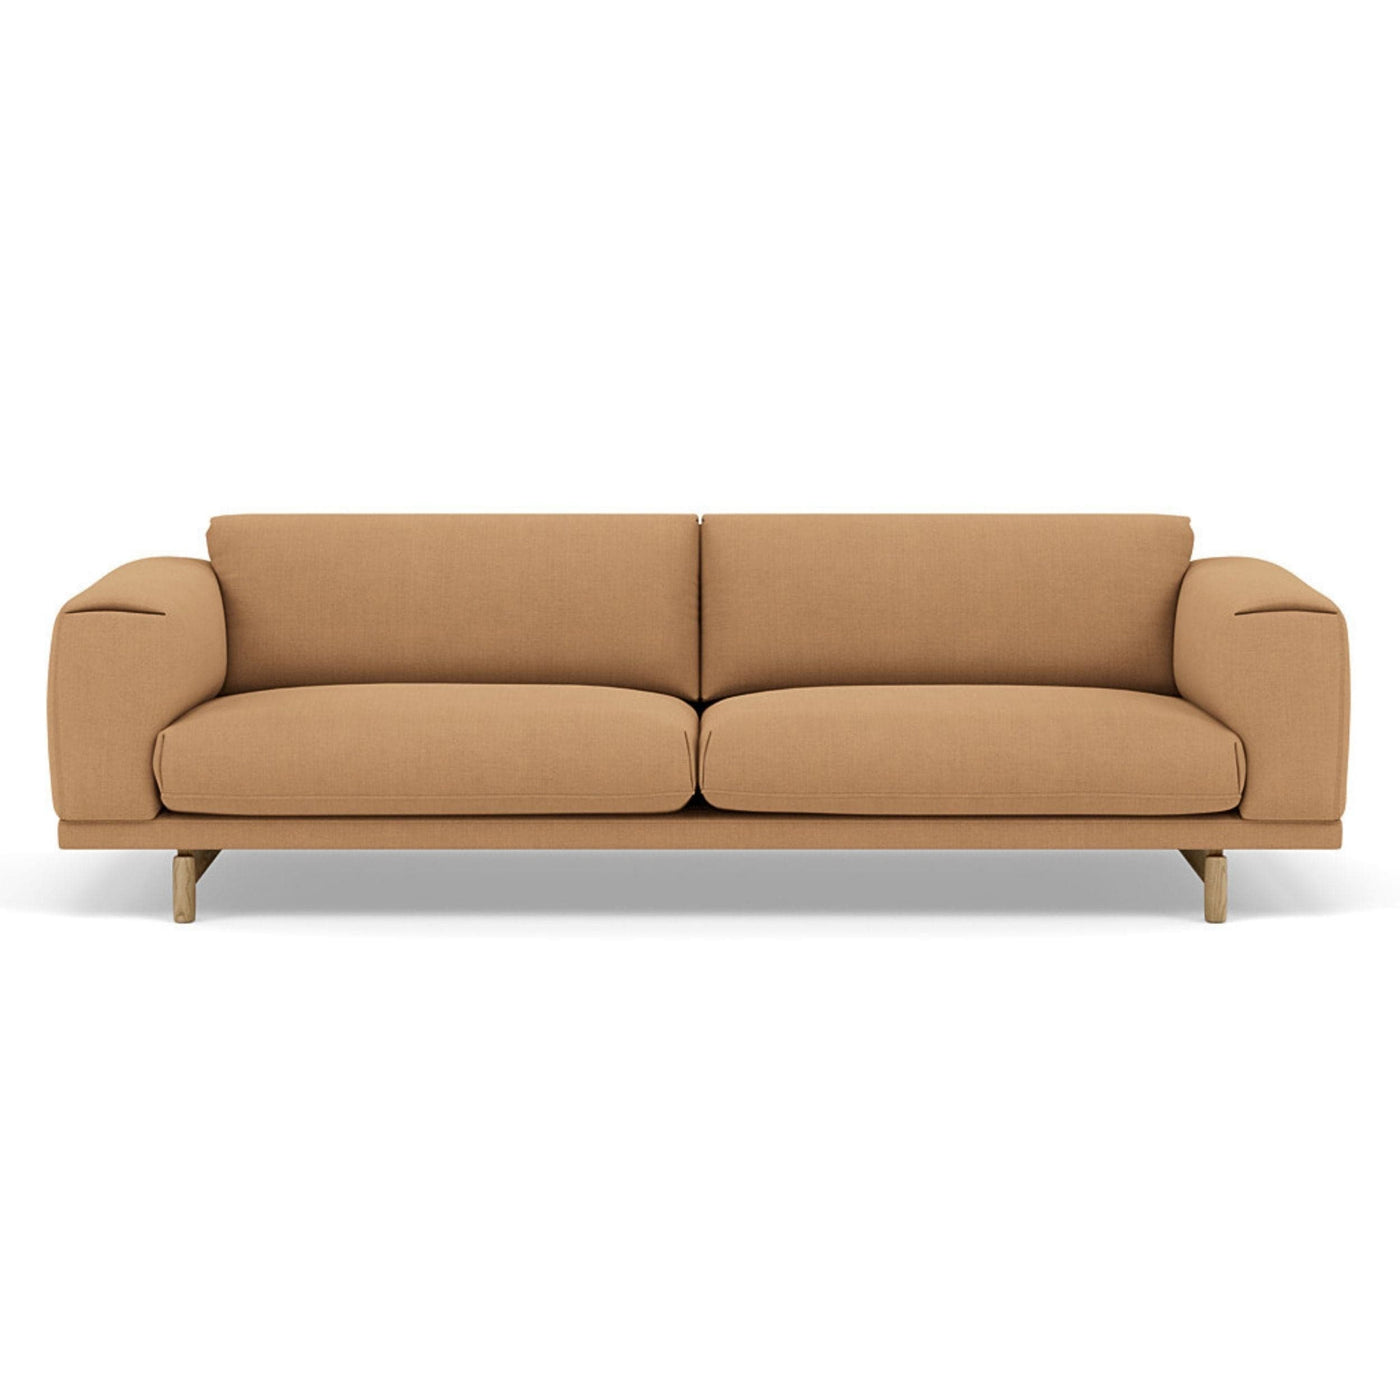 Muuto Rest Sofa 3 Seater in fiord 451 brown. Made to order from someday designs. #colour_fiord-451